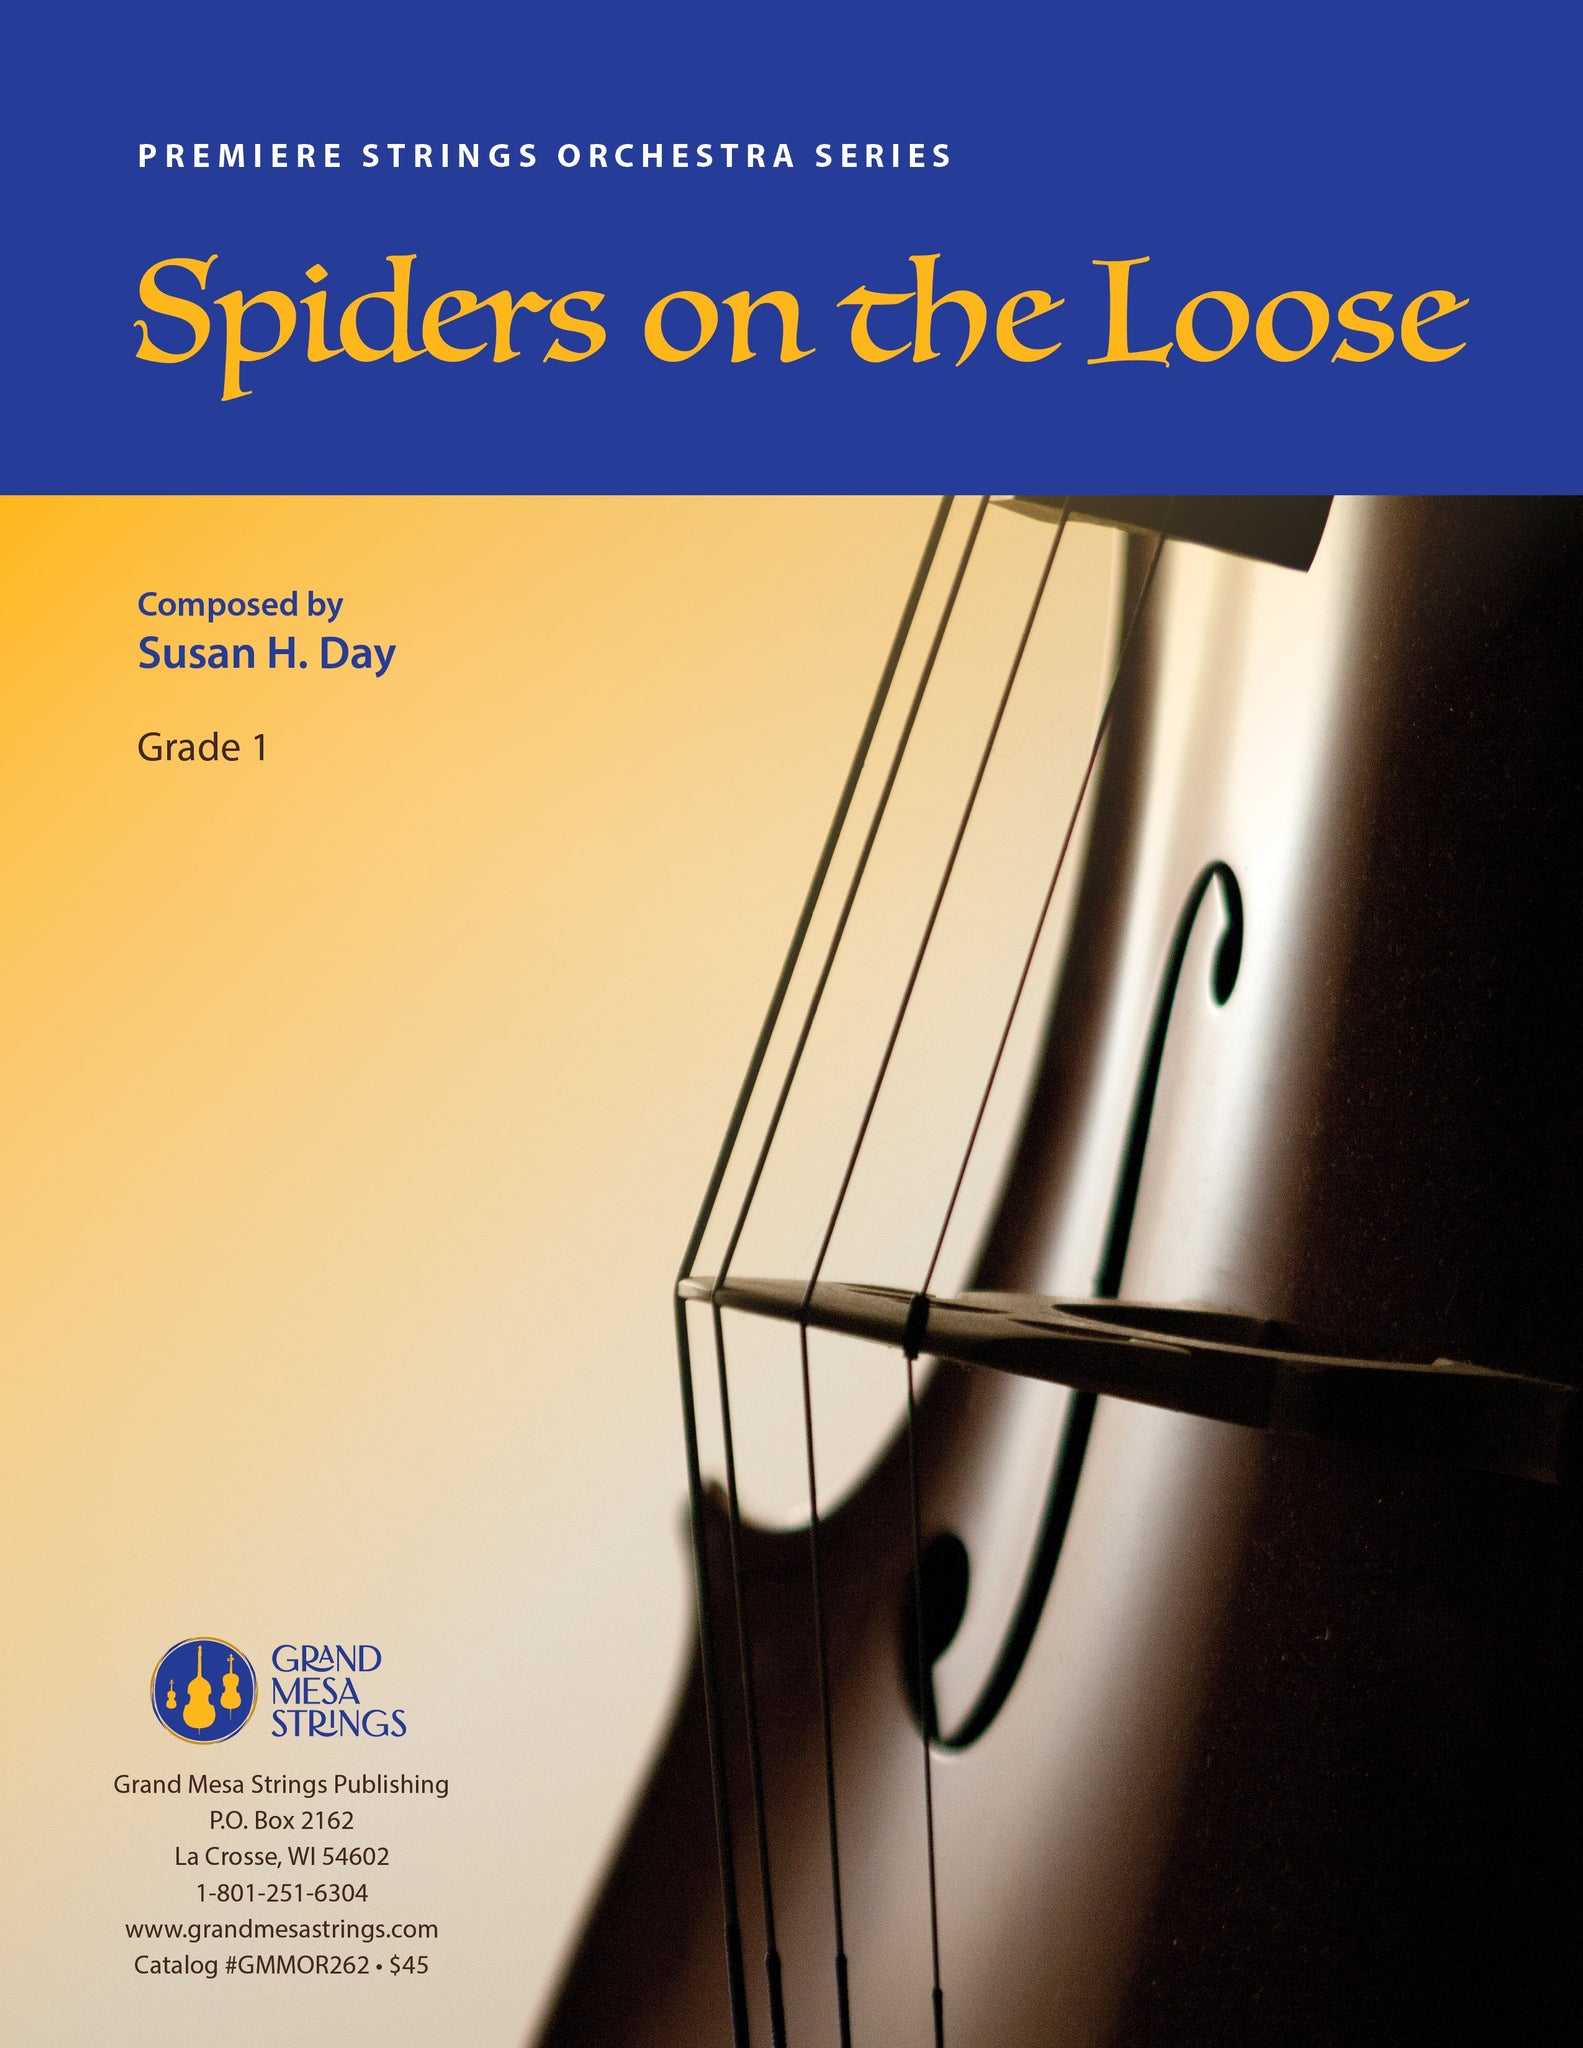 Strings sheet music cover of Spiders on the Loose, composed by Susan H. Day.